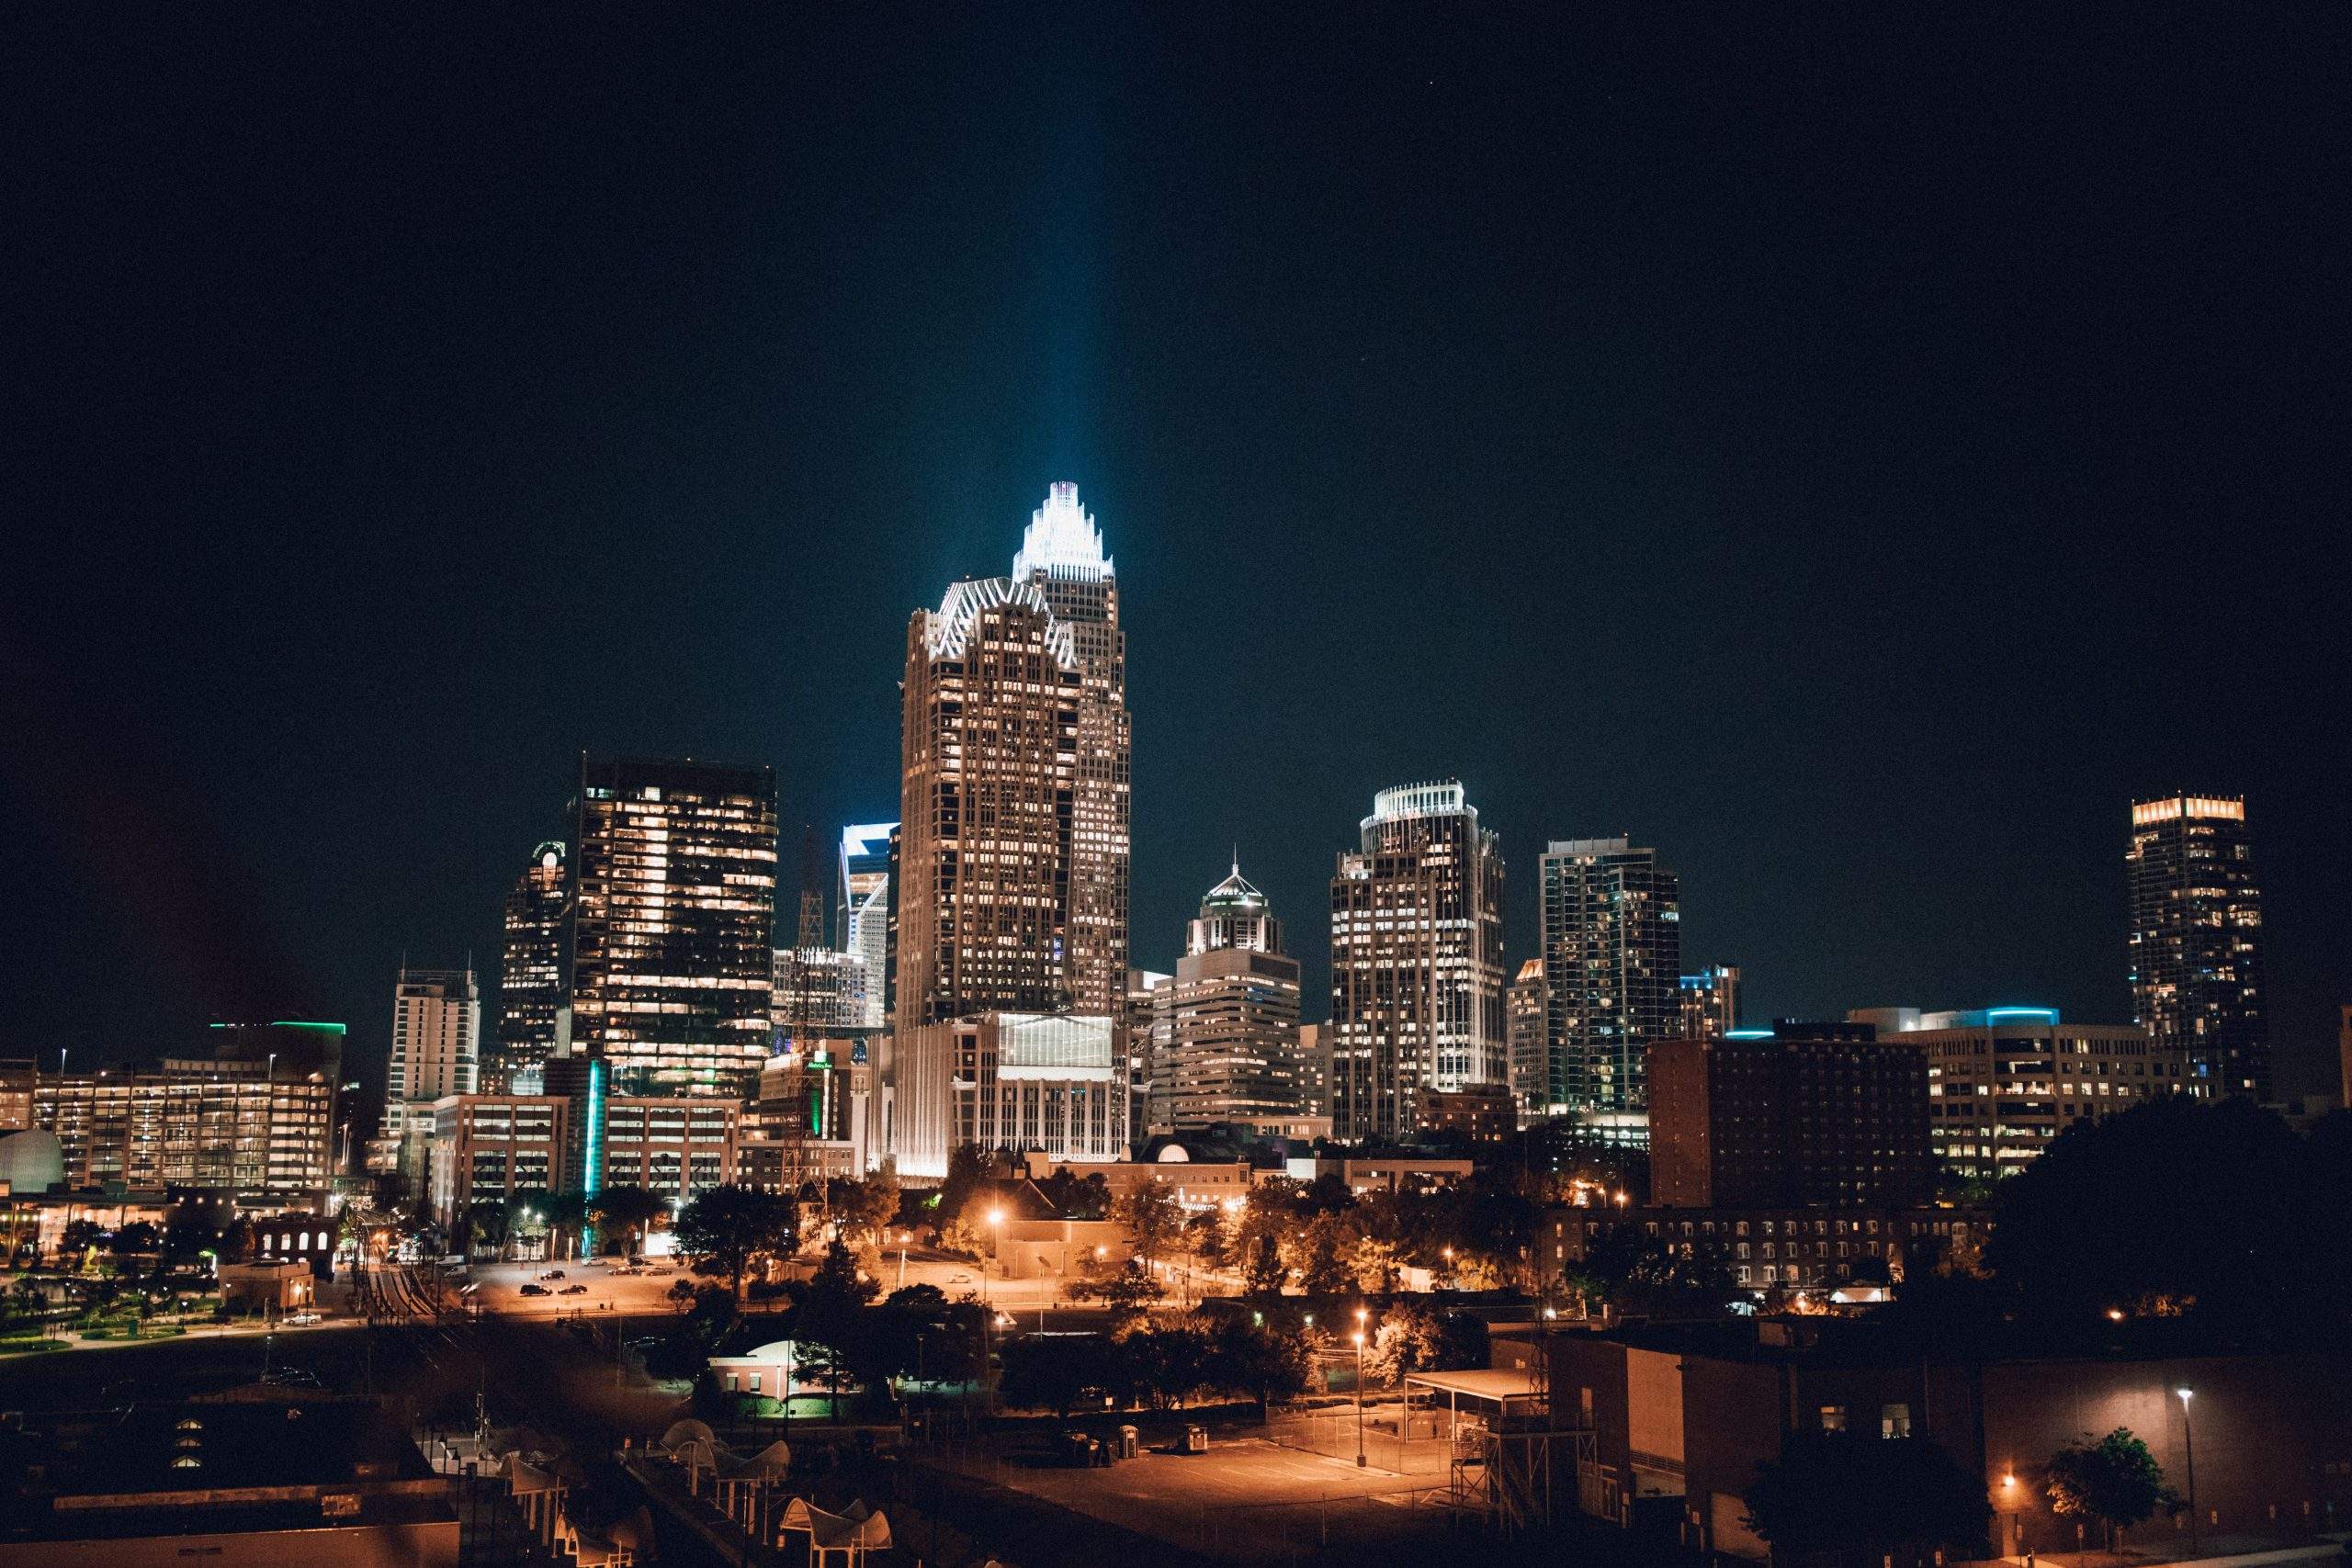 20 Things to Do in Uptown Charlotte, NC